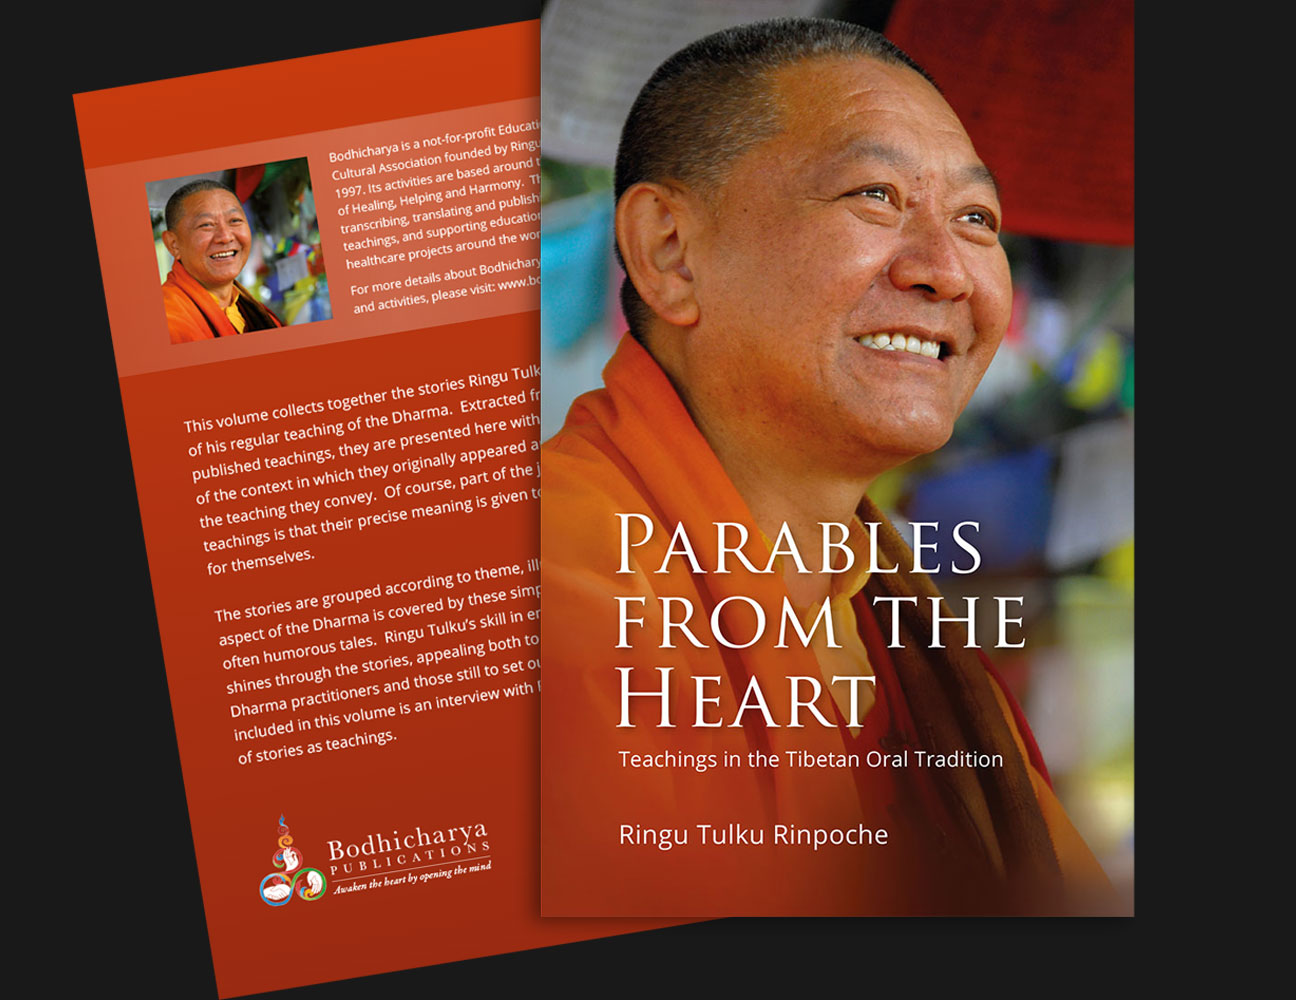 Parables from the Heart